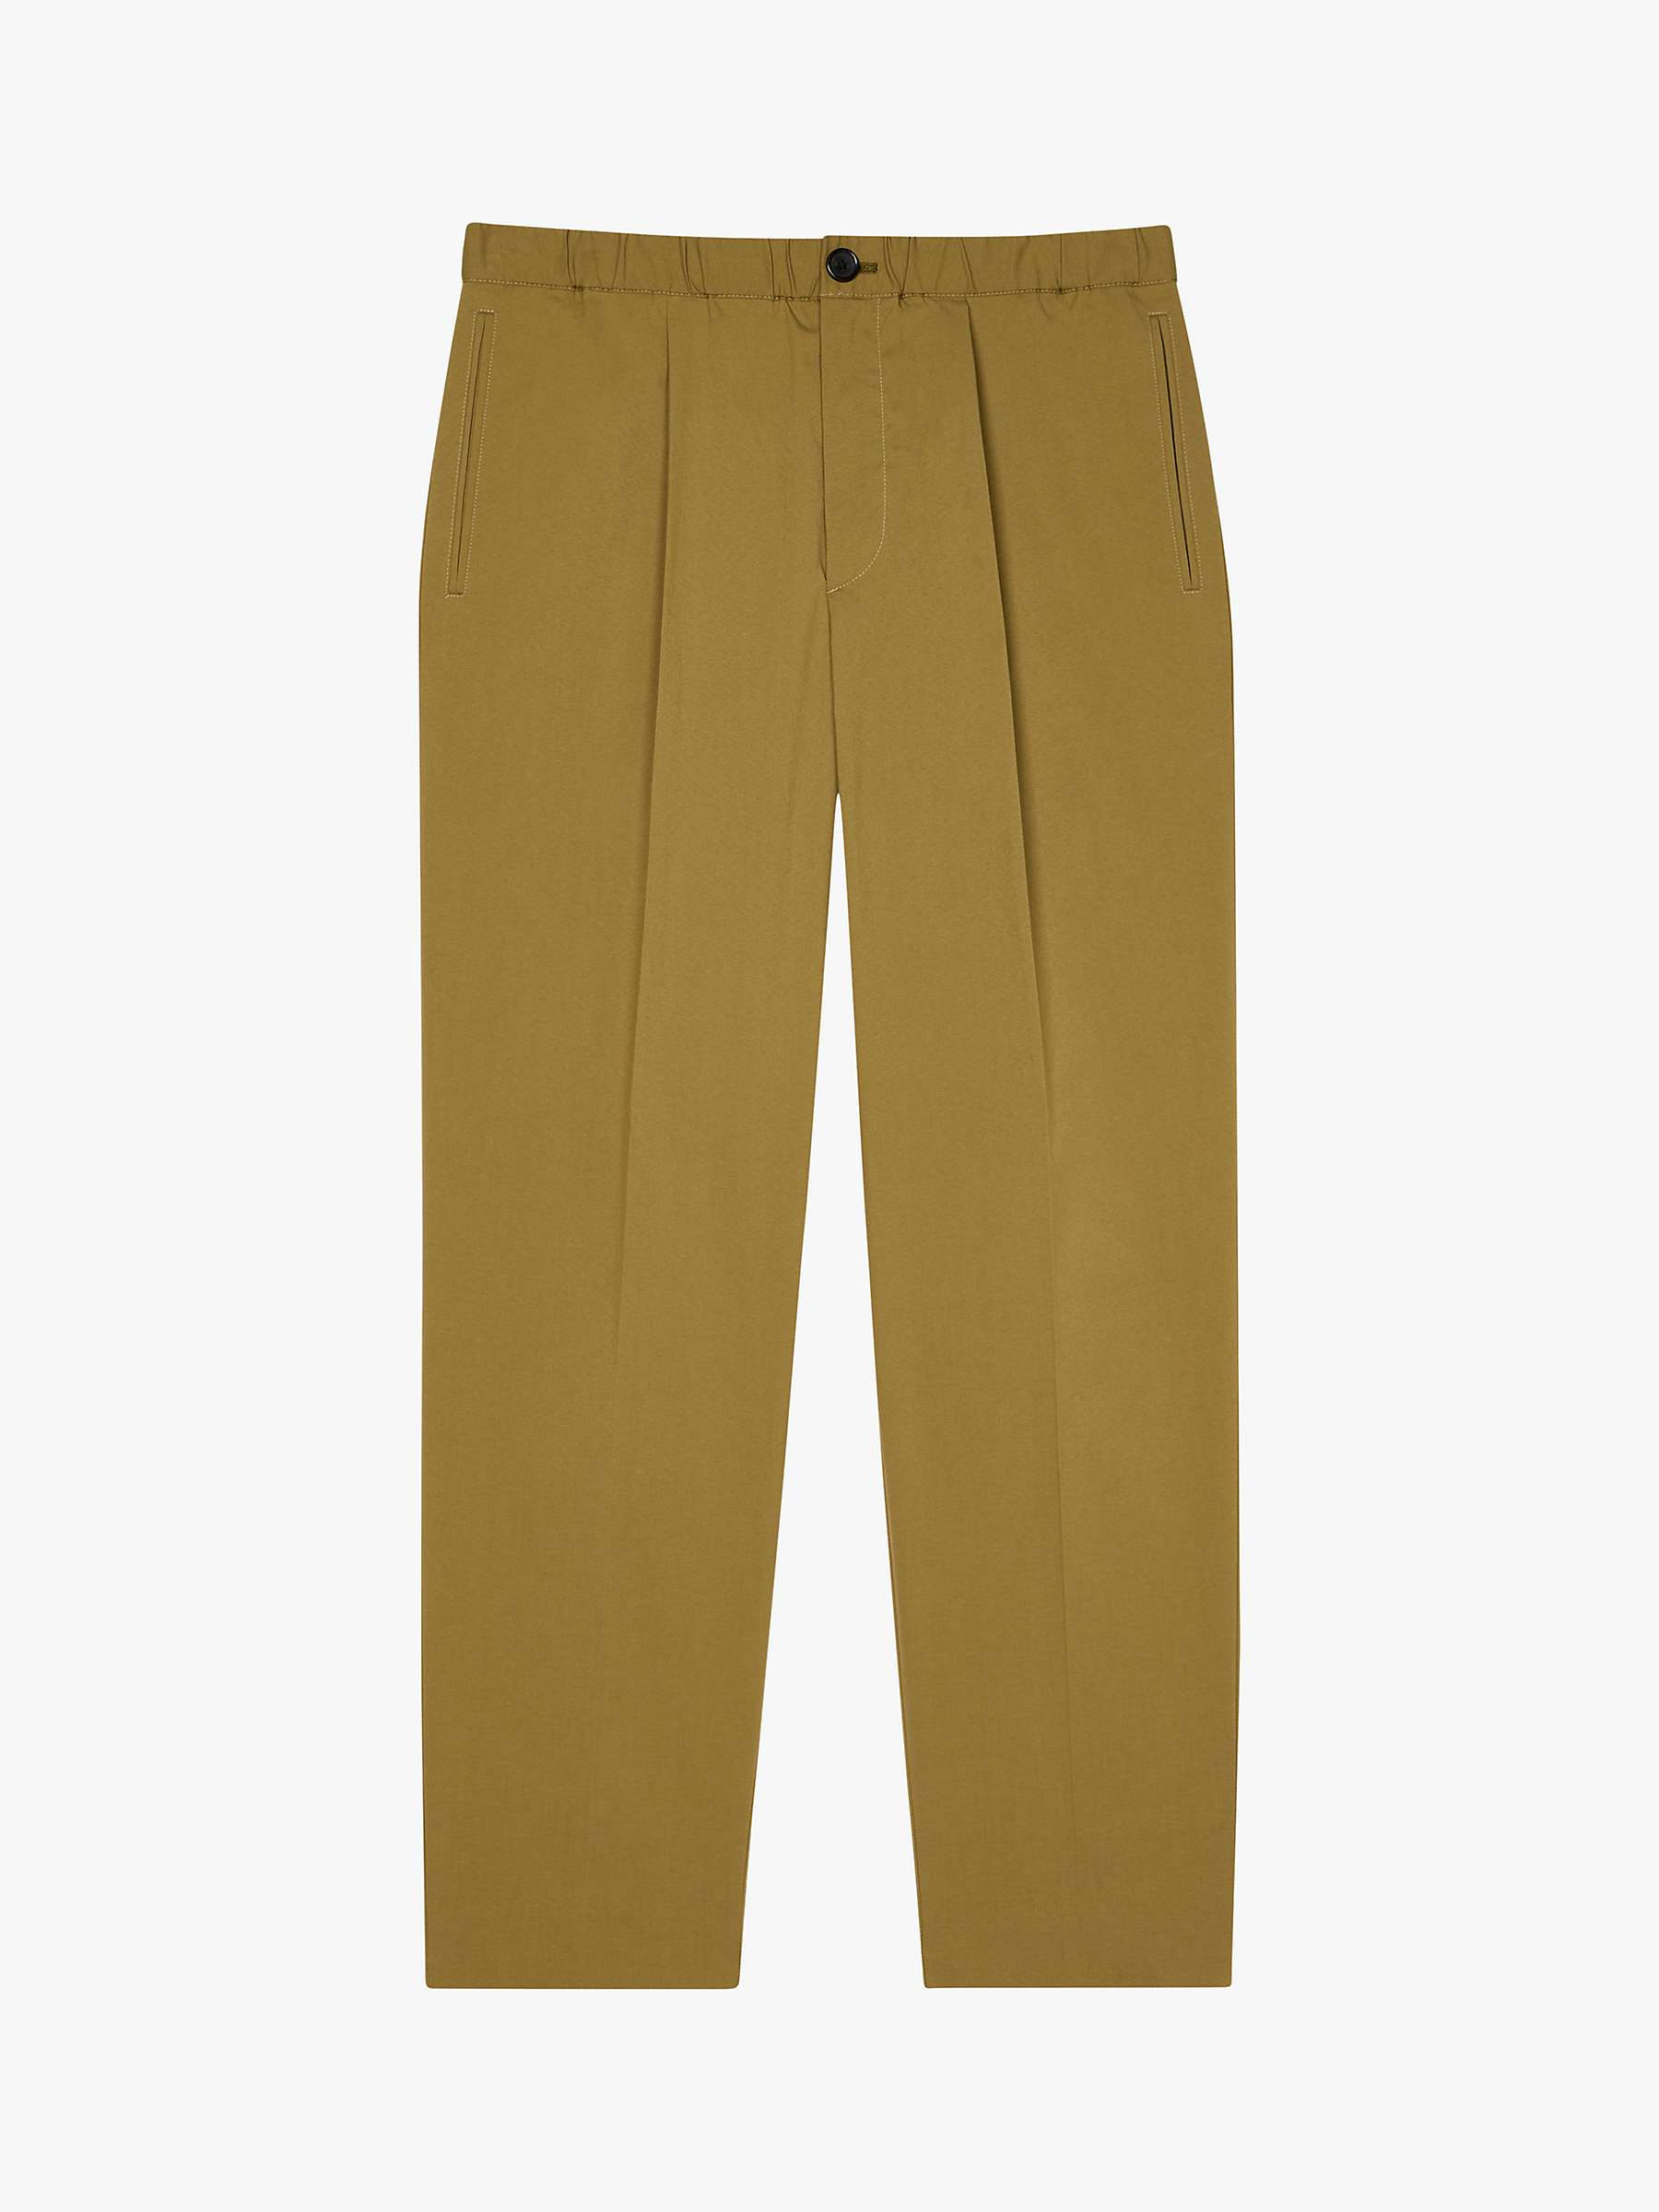 Buy PS Paul Smith Front Pleat Elastic Waist Trousers Online at johnlewis.com